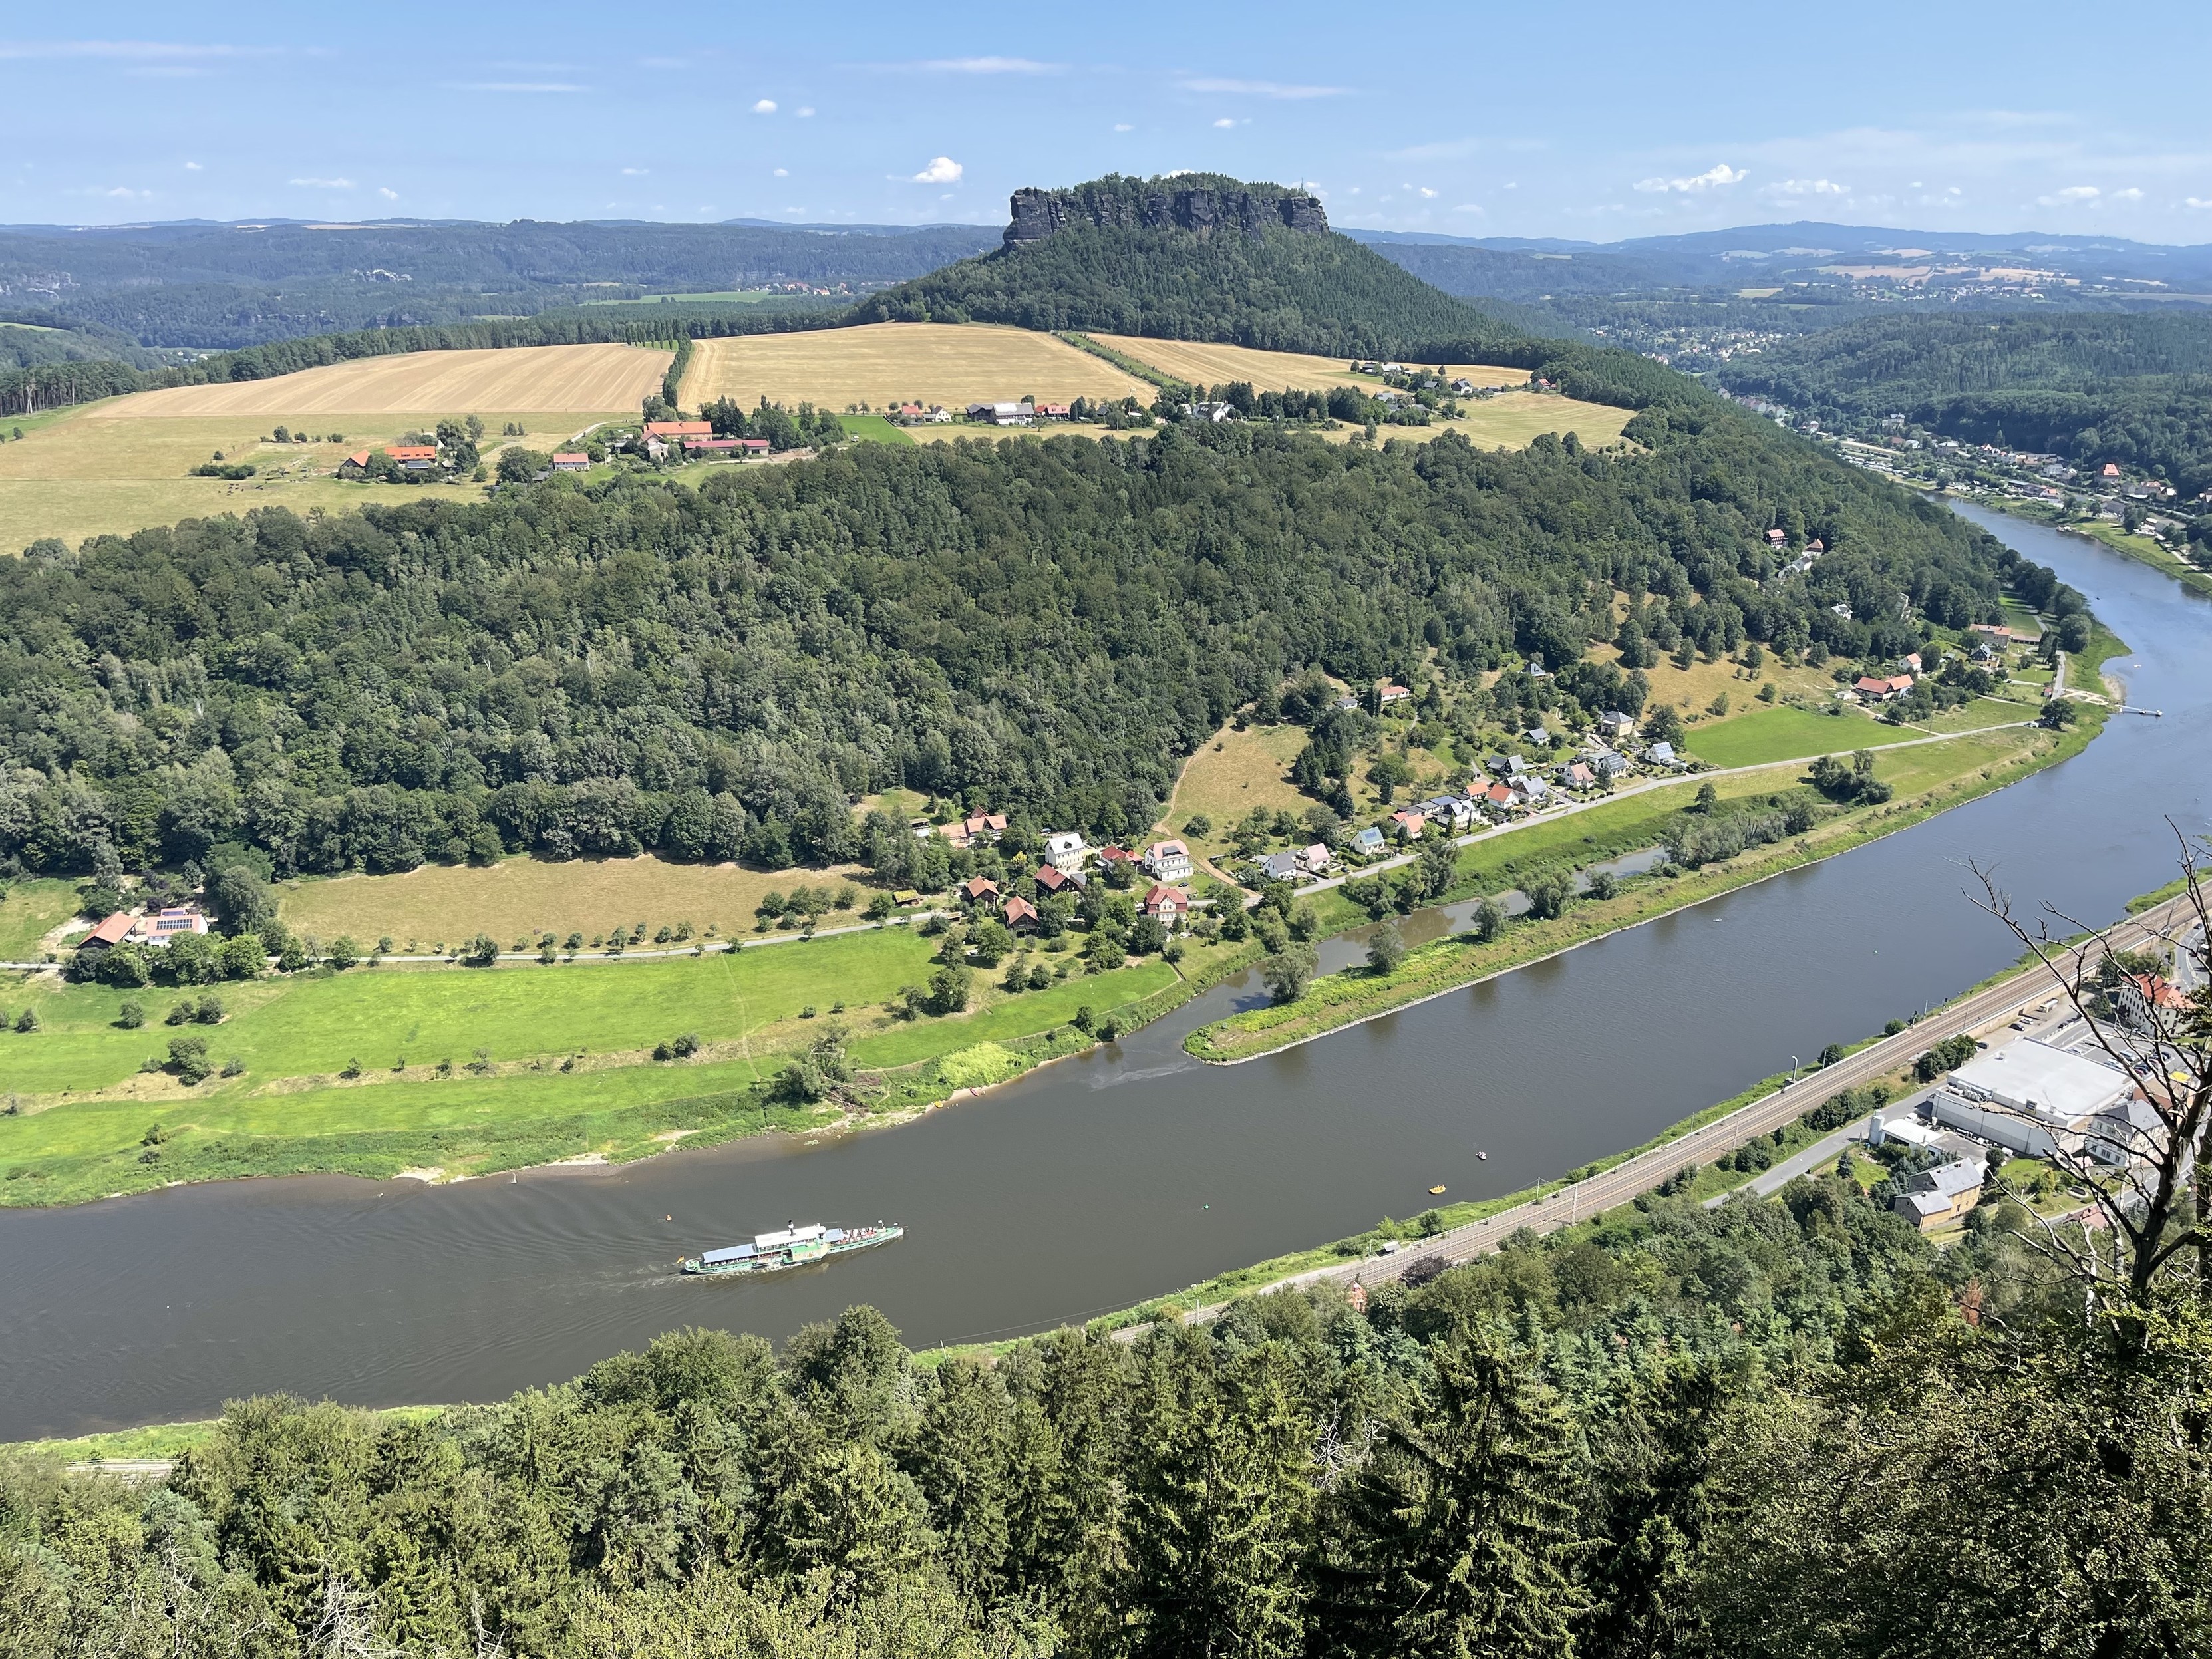 Scenic landscape of a river winding through a lush valley with hills, farmland, and scattered houses, viewed from a higher elevation.